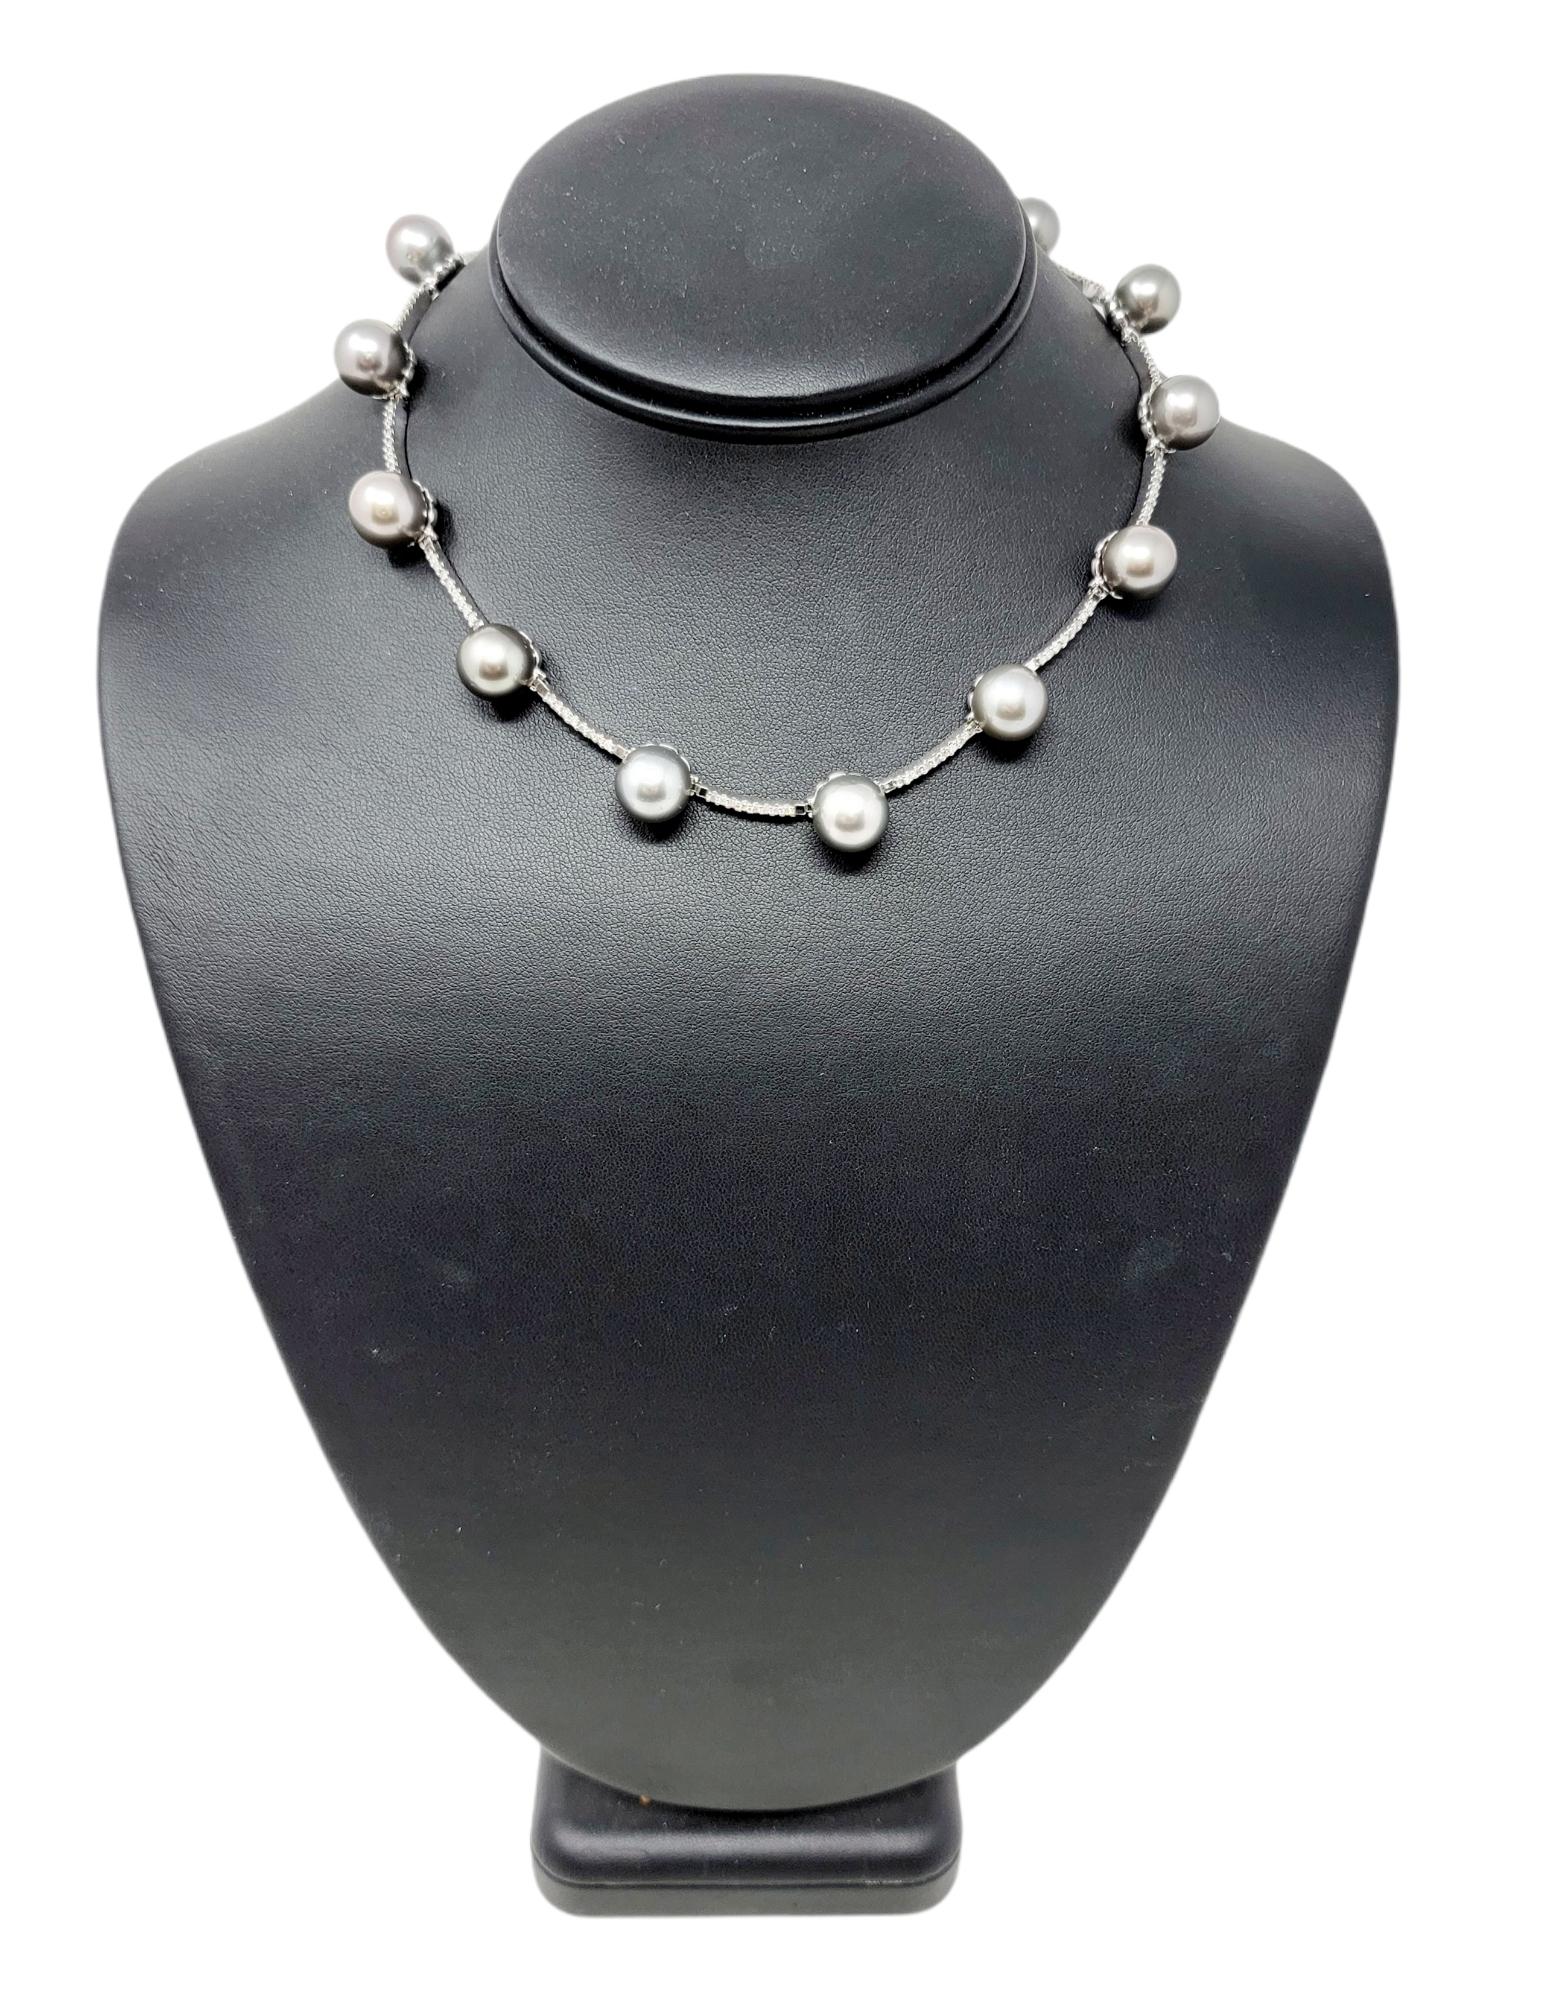 Contemporary diamond and pearl station necklace will make an elegant statement on the neck. The diamond encrusted bar links paired with the stunning silver pearls is truly a sight to see. It features 14 cultured Tahitian pearls in a gorgeous silver